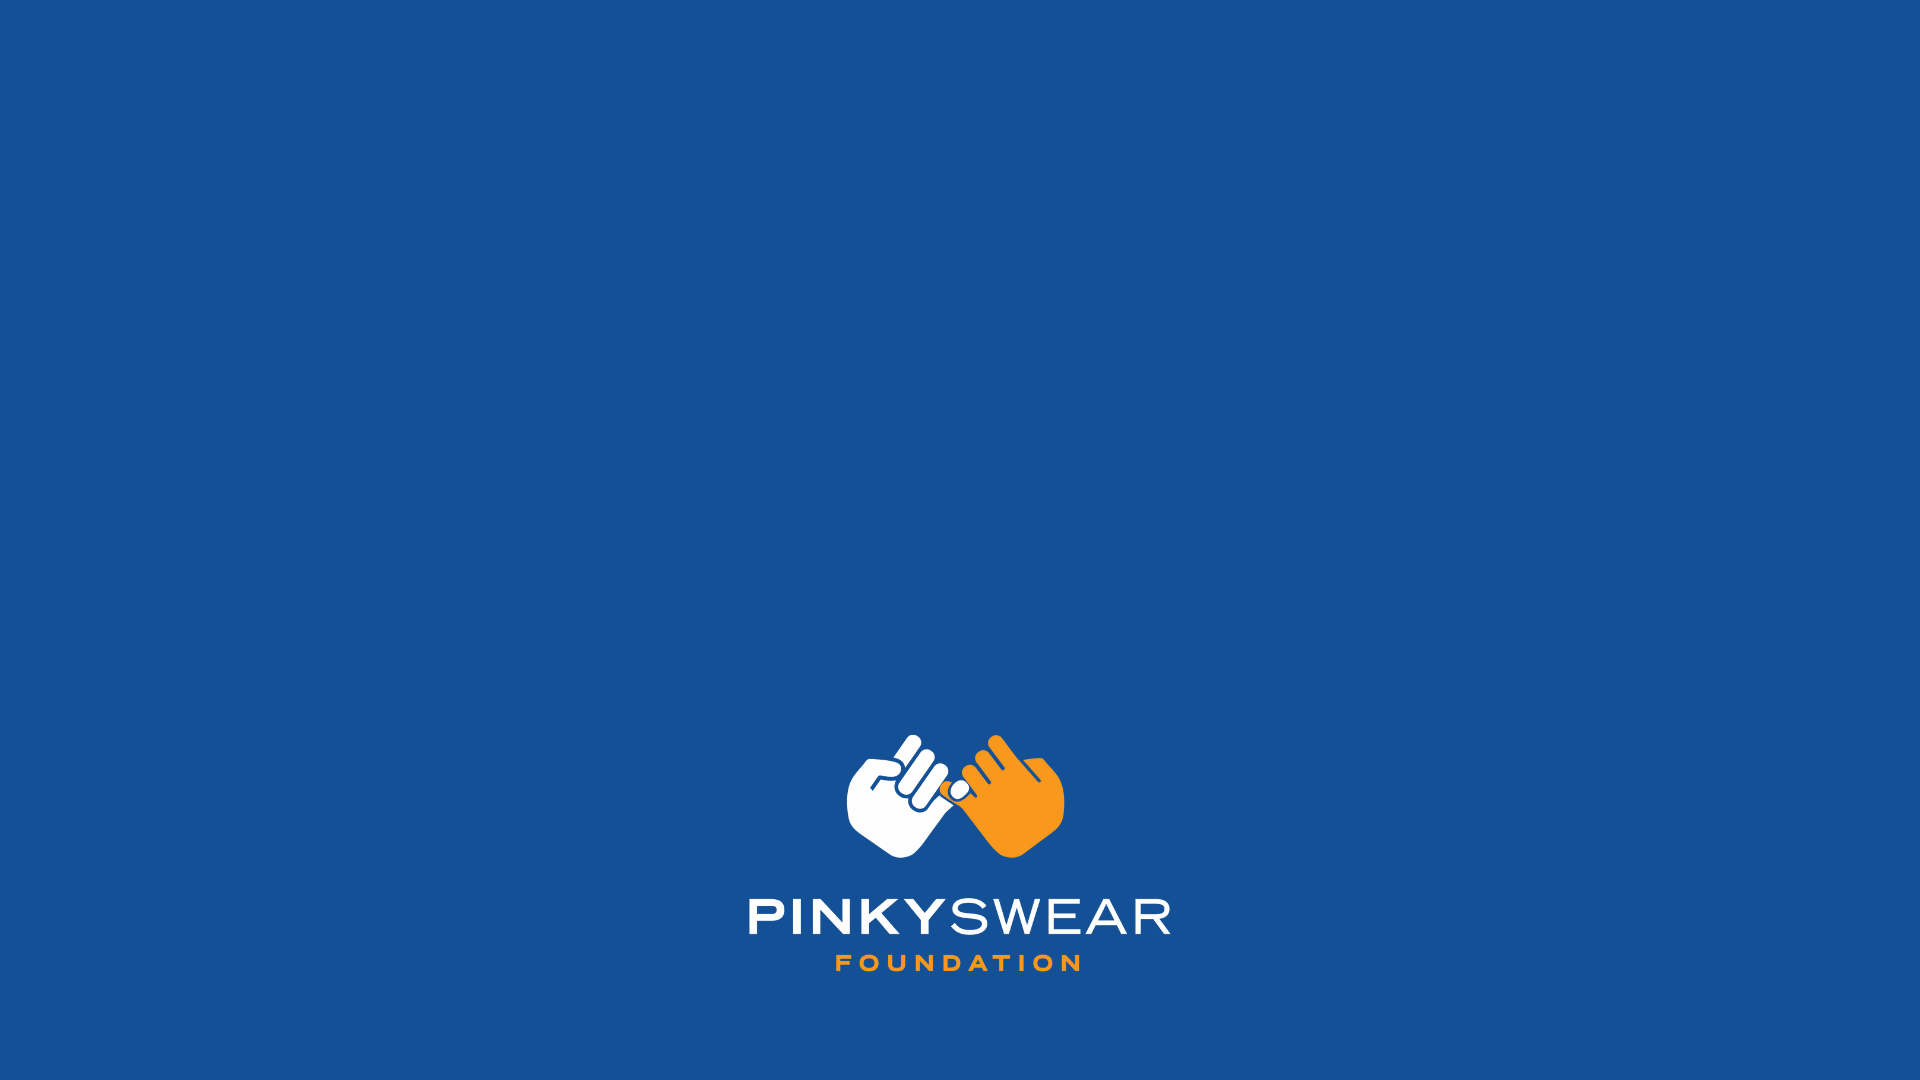 blue image with the orange and white Pinky Swear Foundation logo